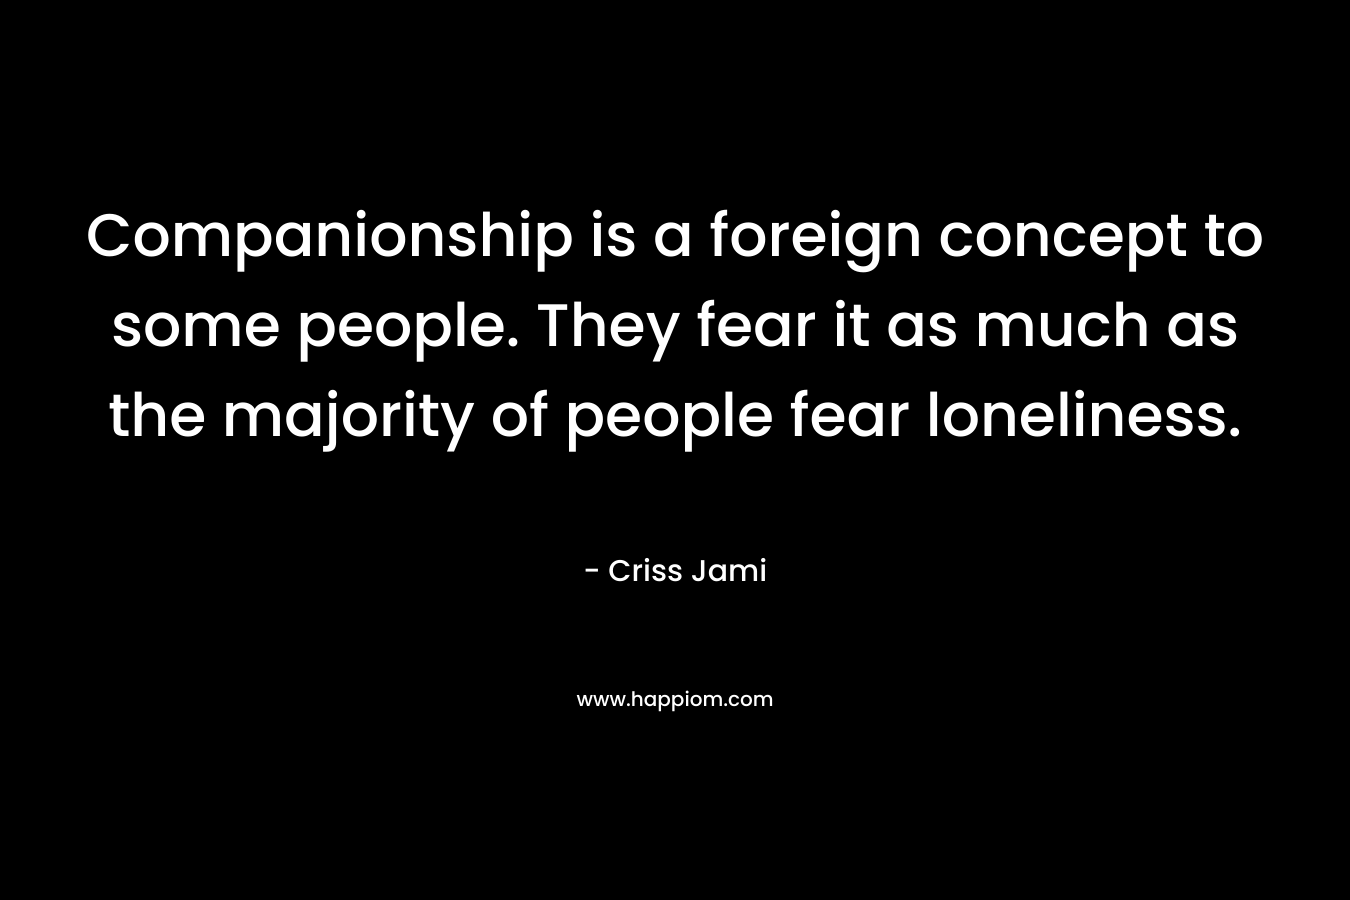 Companionship is a foreign concept to some people. They fear it as much as the majority of people fear loneliness.